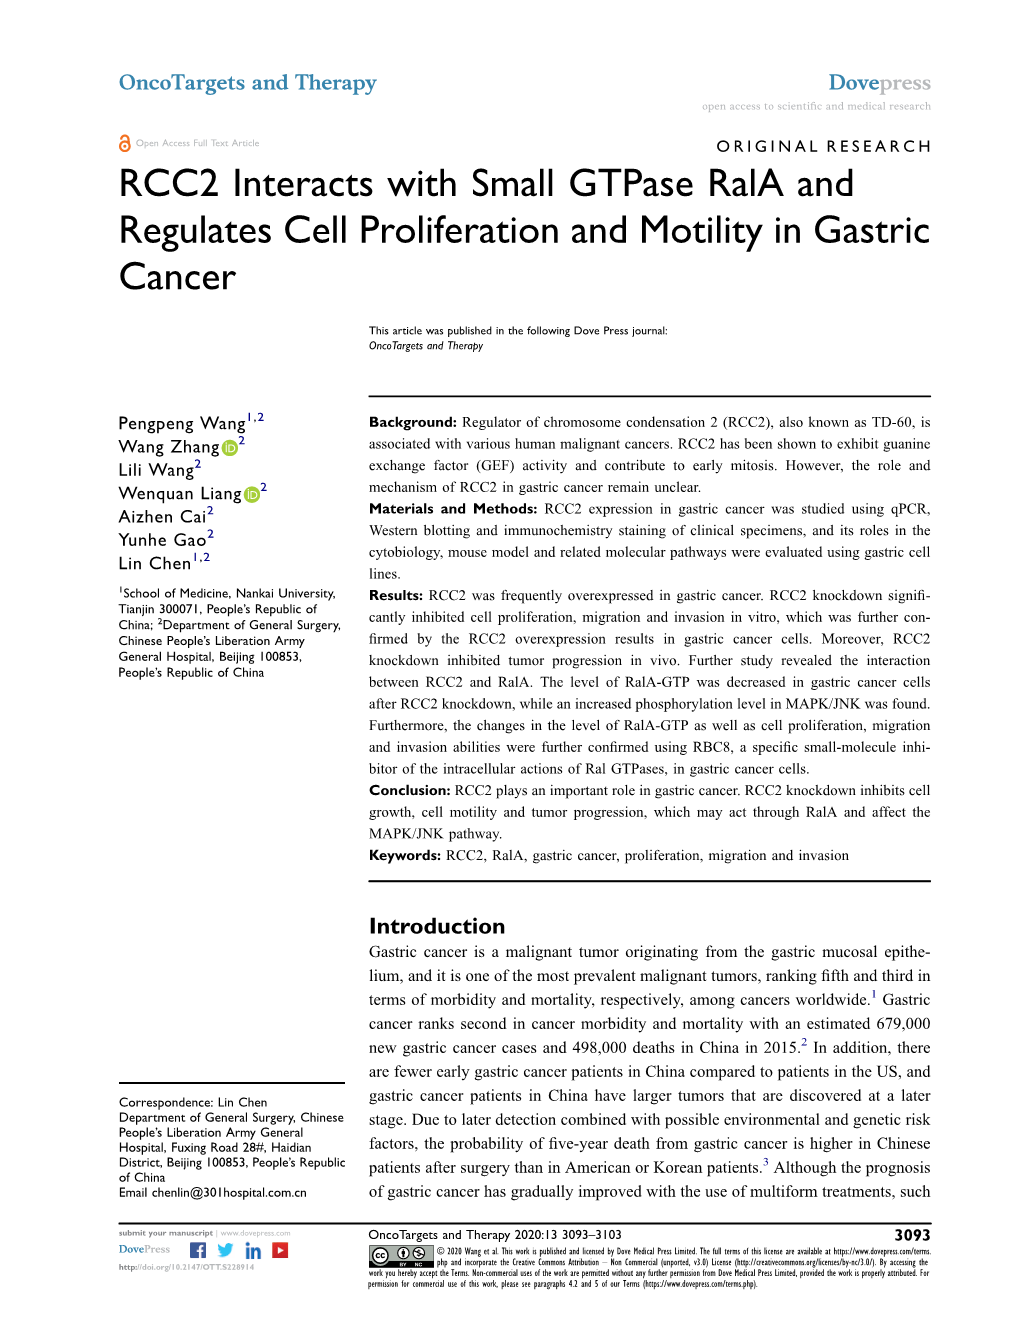 RCC2 Interacts with Small Gtpase Rala and Regulates Cell Proliferation and Motility in Gastric Cancer